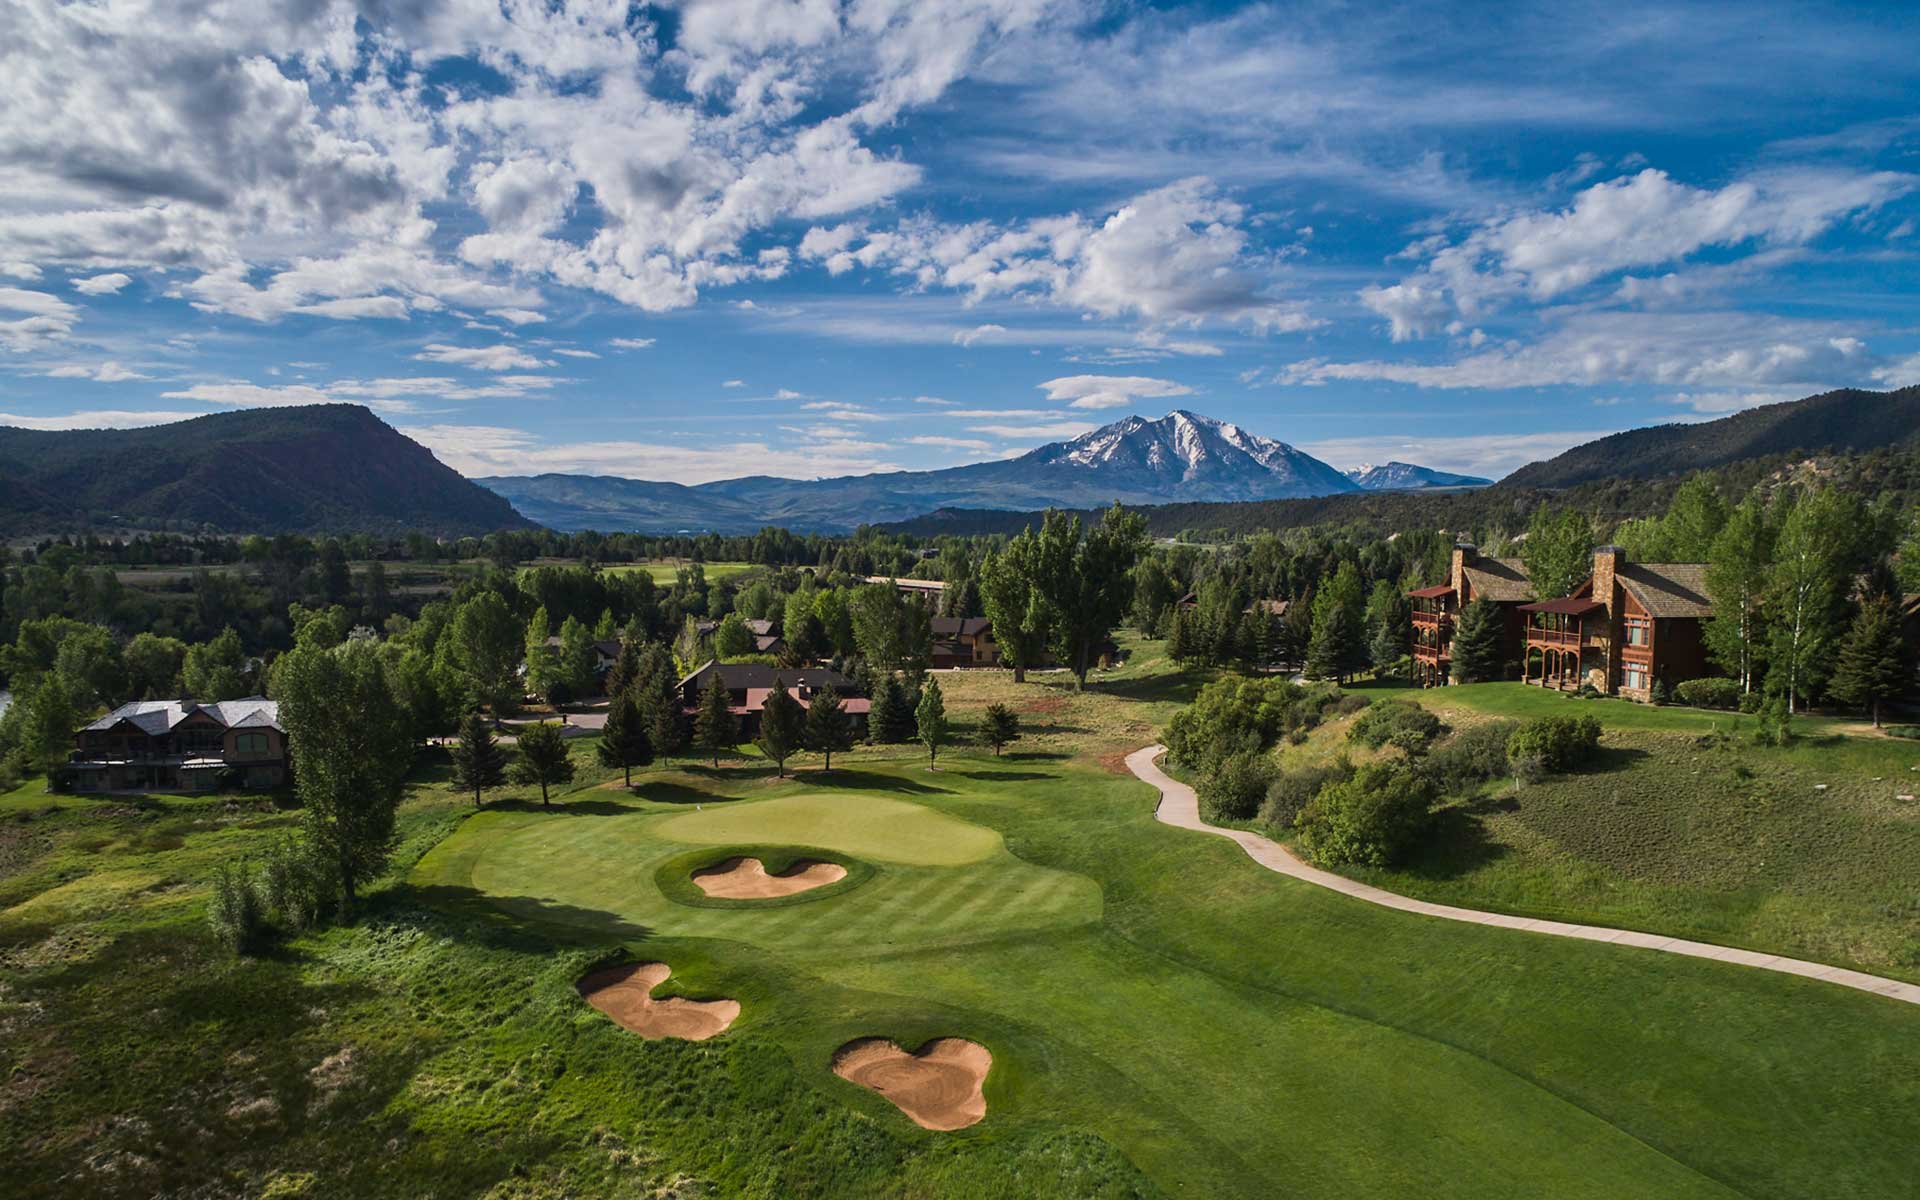 Aspen Glen Club Golf & Country Club Carbondale, CO Invited